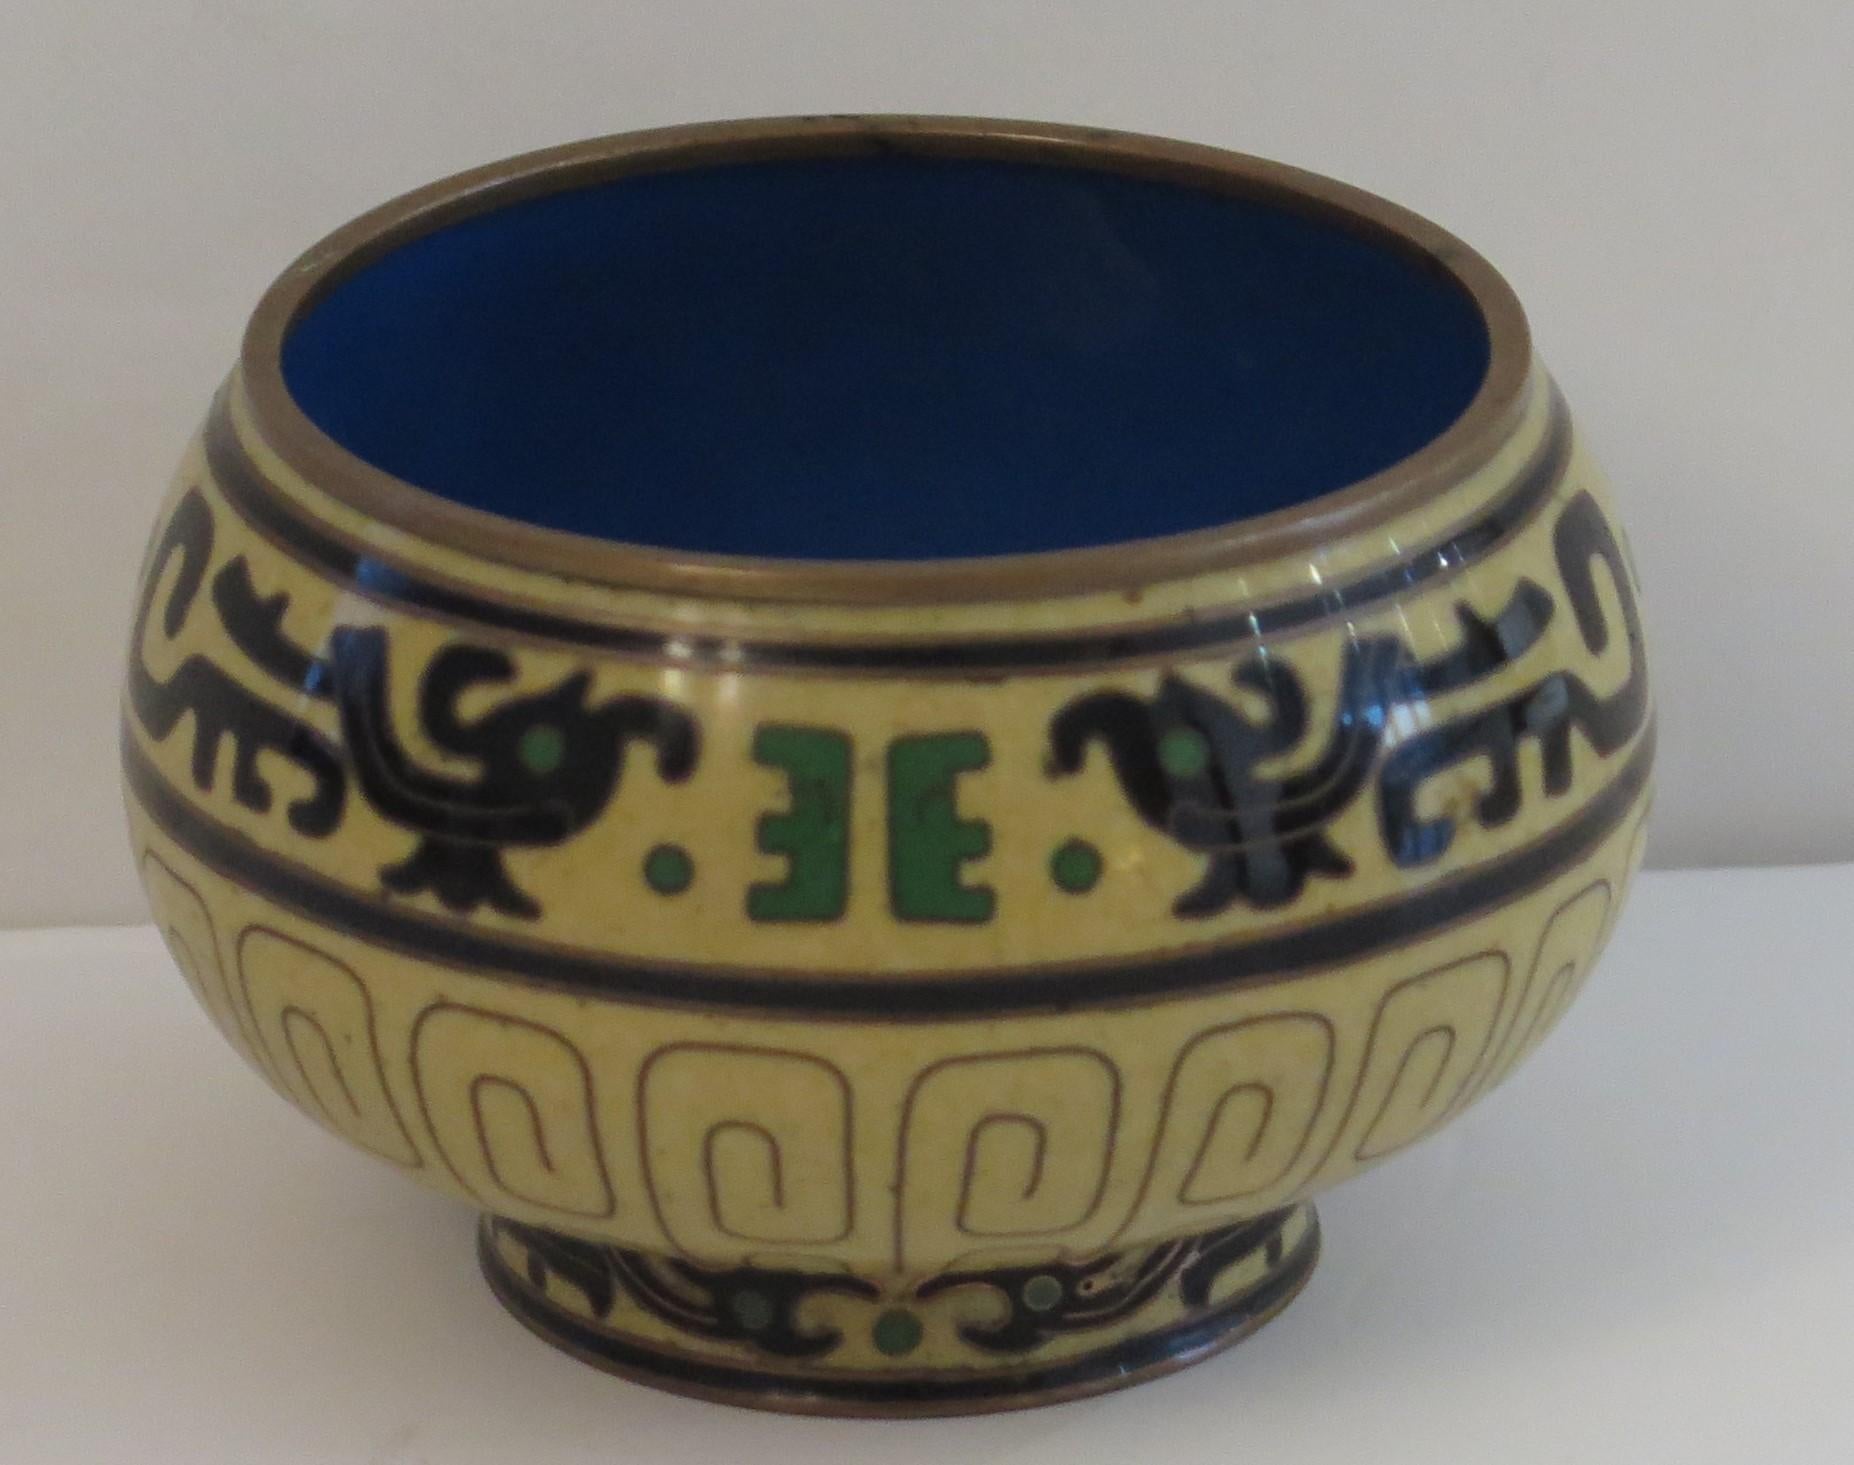 19thC Japanese Cloisonné Brush Washer Bowl, Meiji Period circa 1880 In Good Condition For Sale In Lincoln, Lincolnshire